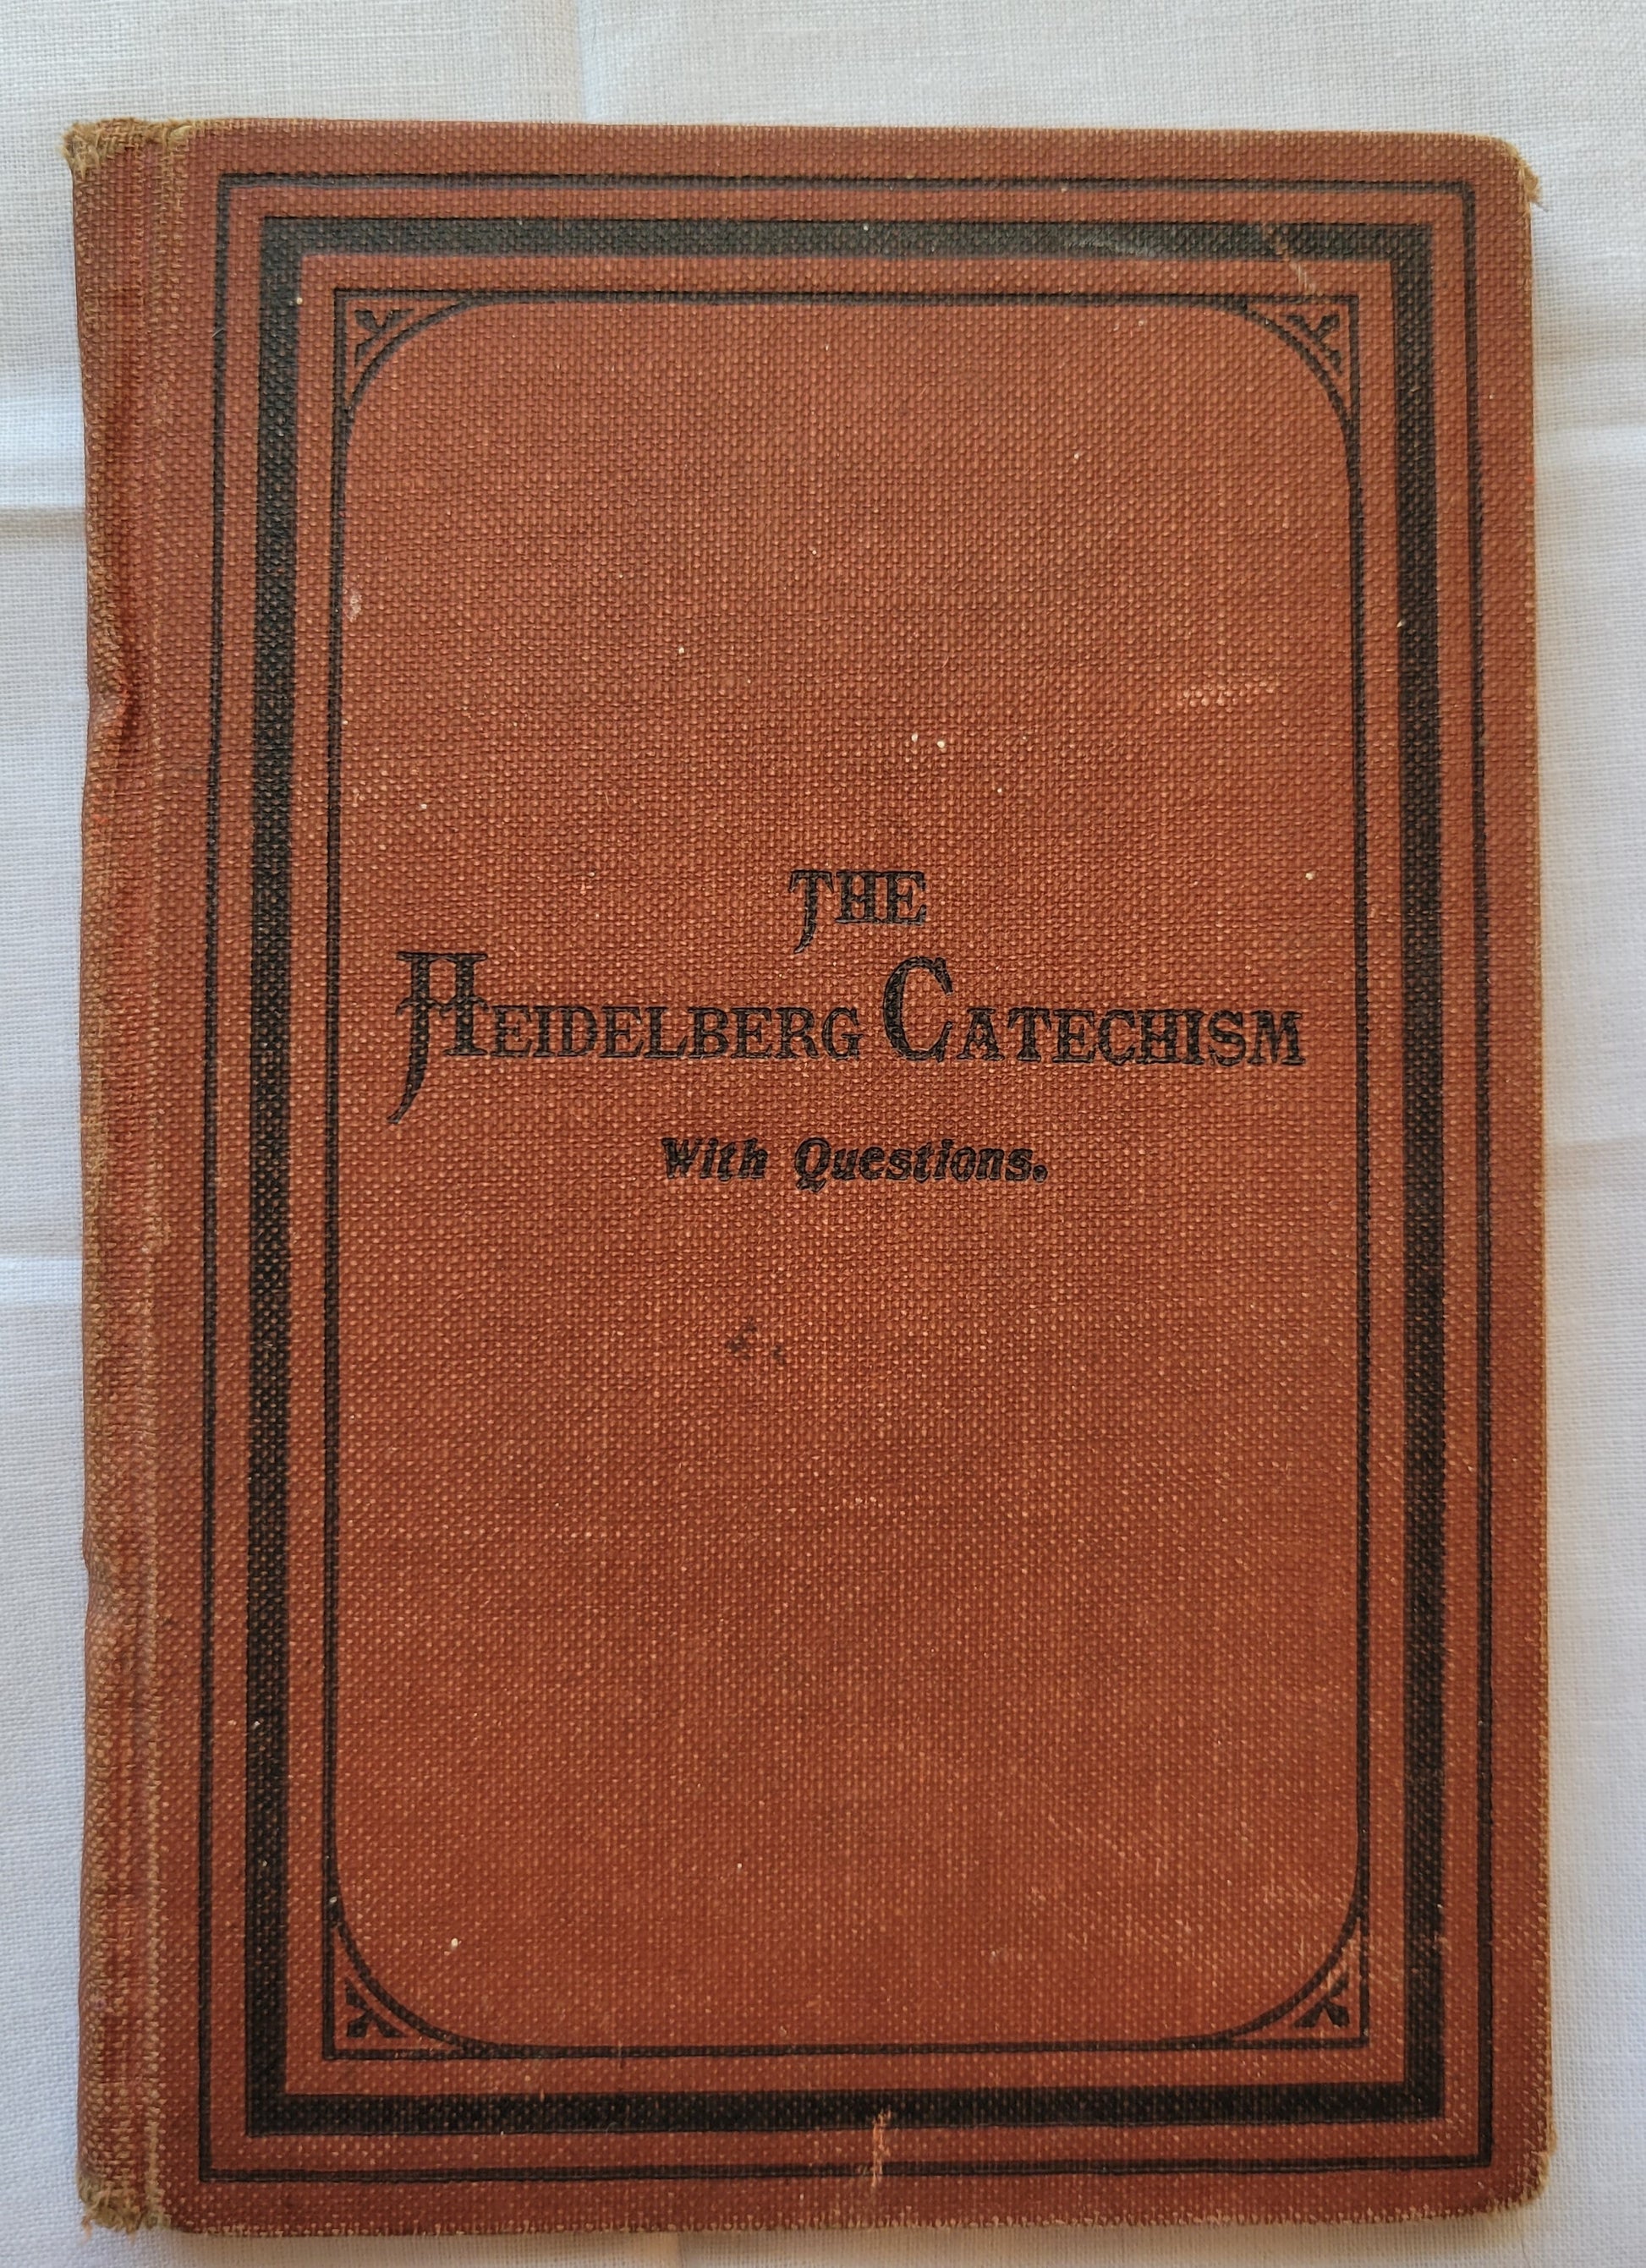 Antique book for sale "The Heidelberg Catechism: With Questions for the Catechetical Class and the Sunday-School by Rec. Aaron Spangler, A.M.", published in 1899 by the Central Publishing House. Front cover.